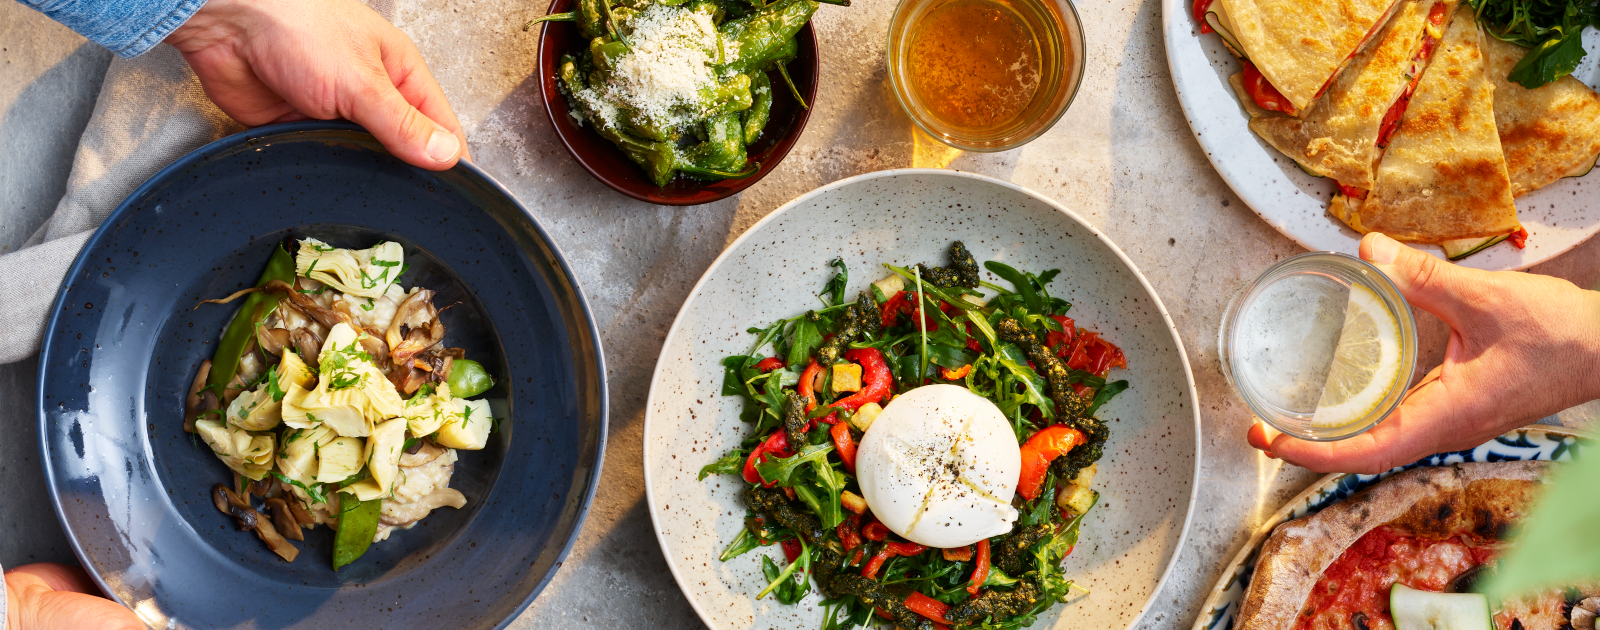 Plates and bowls with colourful meals against a concrete background.